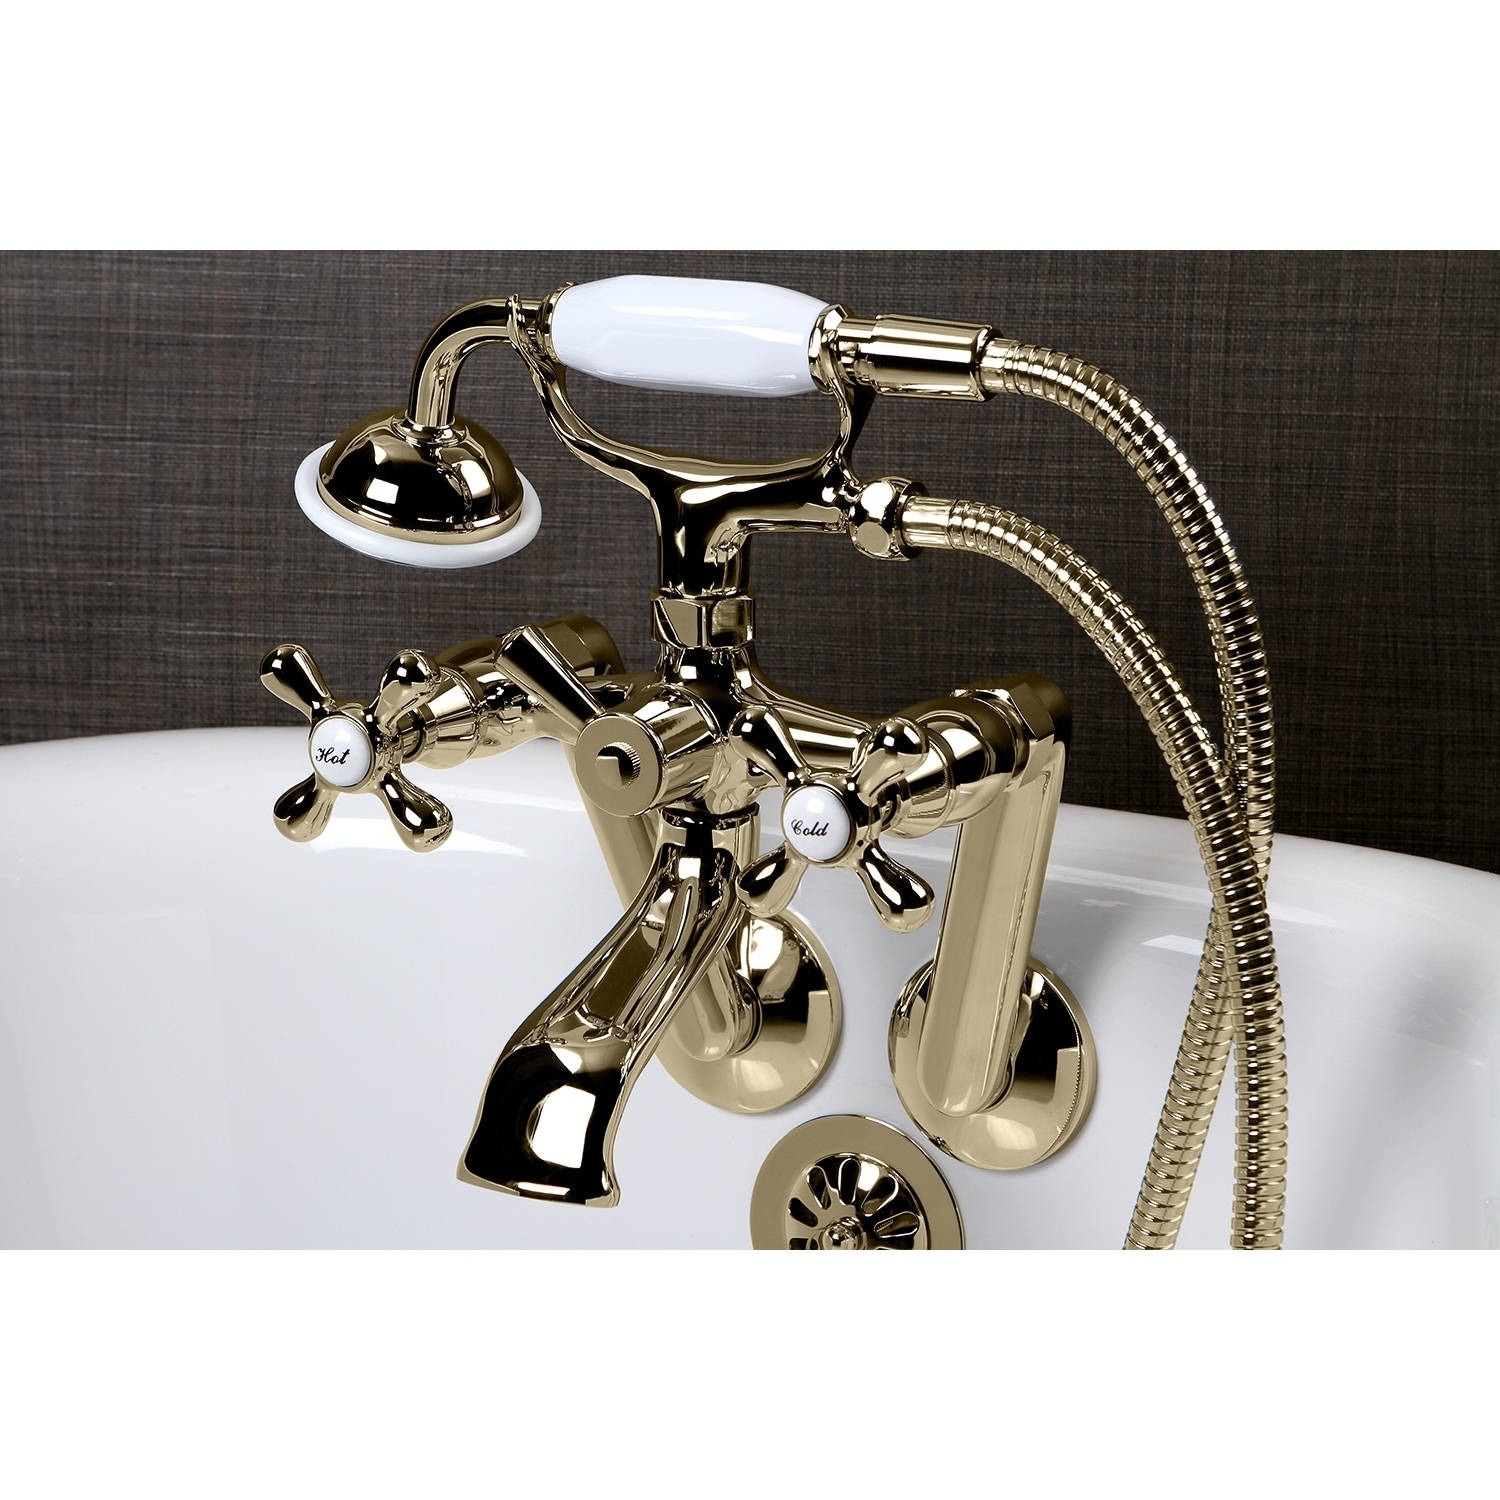 Shop Tub Wall Mount Polished Brass Clawfoot Tub Faucet Overstock